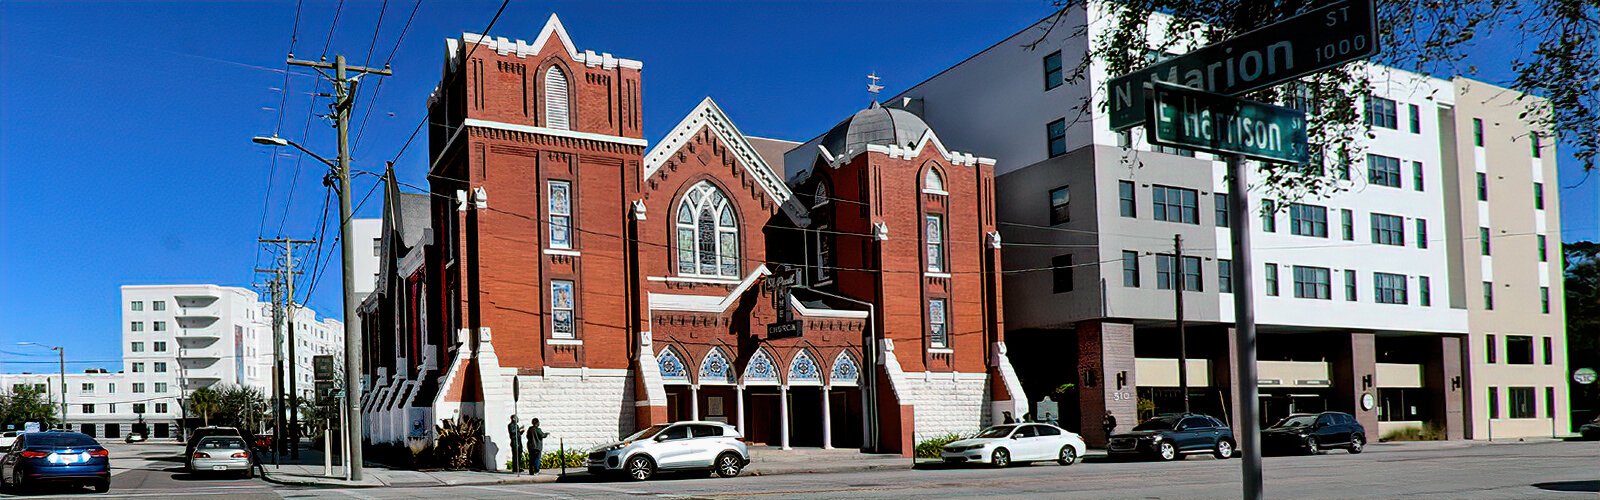 To celebrate Black History Month, the Tampa Bay History Center gave a walking tour of Central Avenue West, once a thriving Black neighborhood in Tampa. The tour included historic St. Paul African Methodist Episcopal Church, founded in 1870.